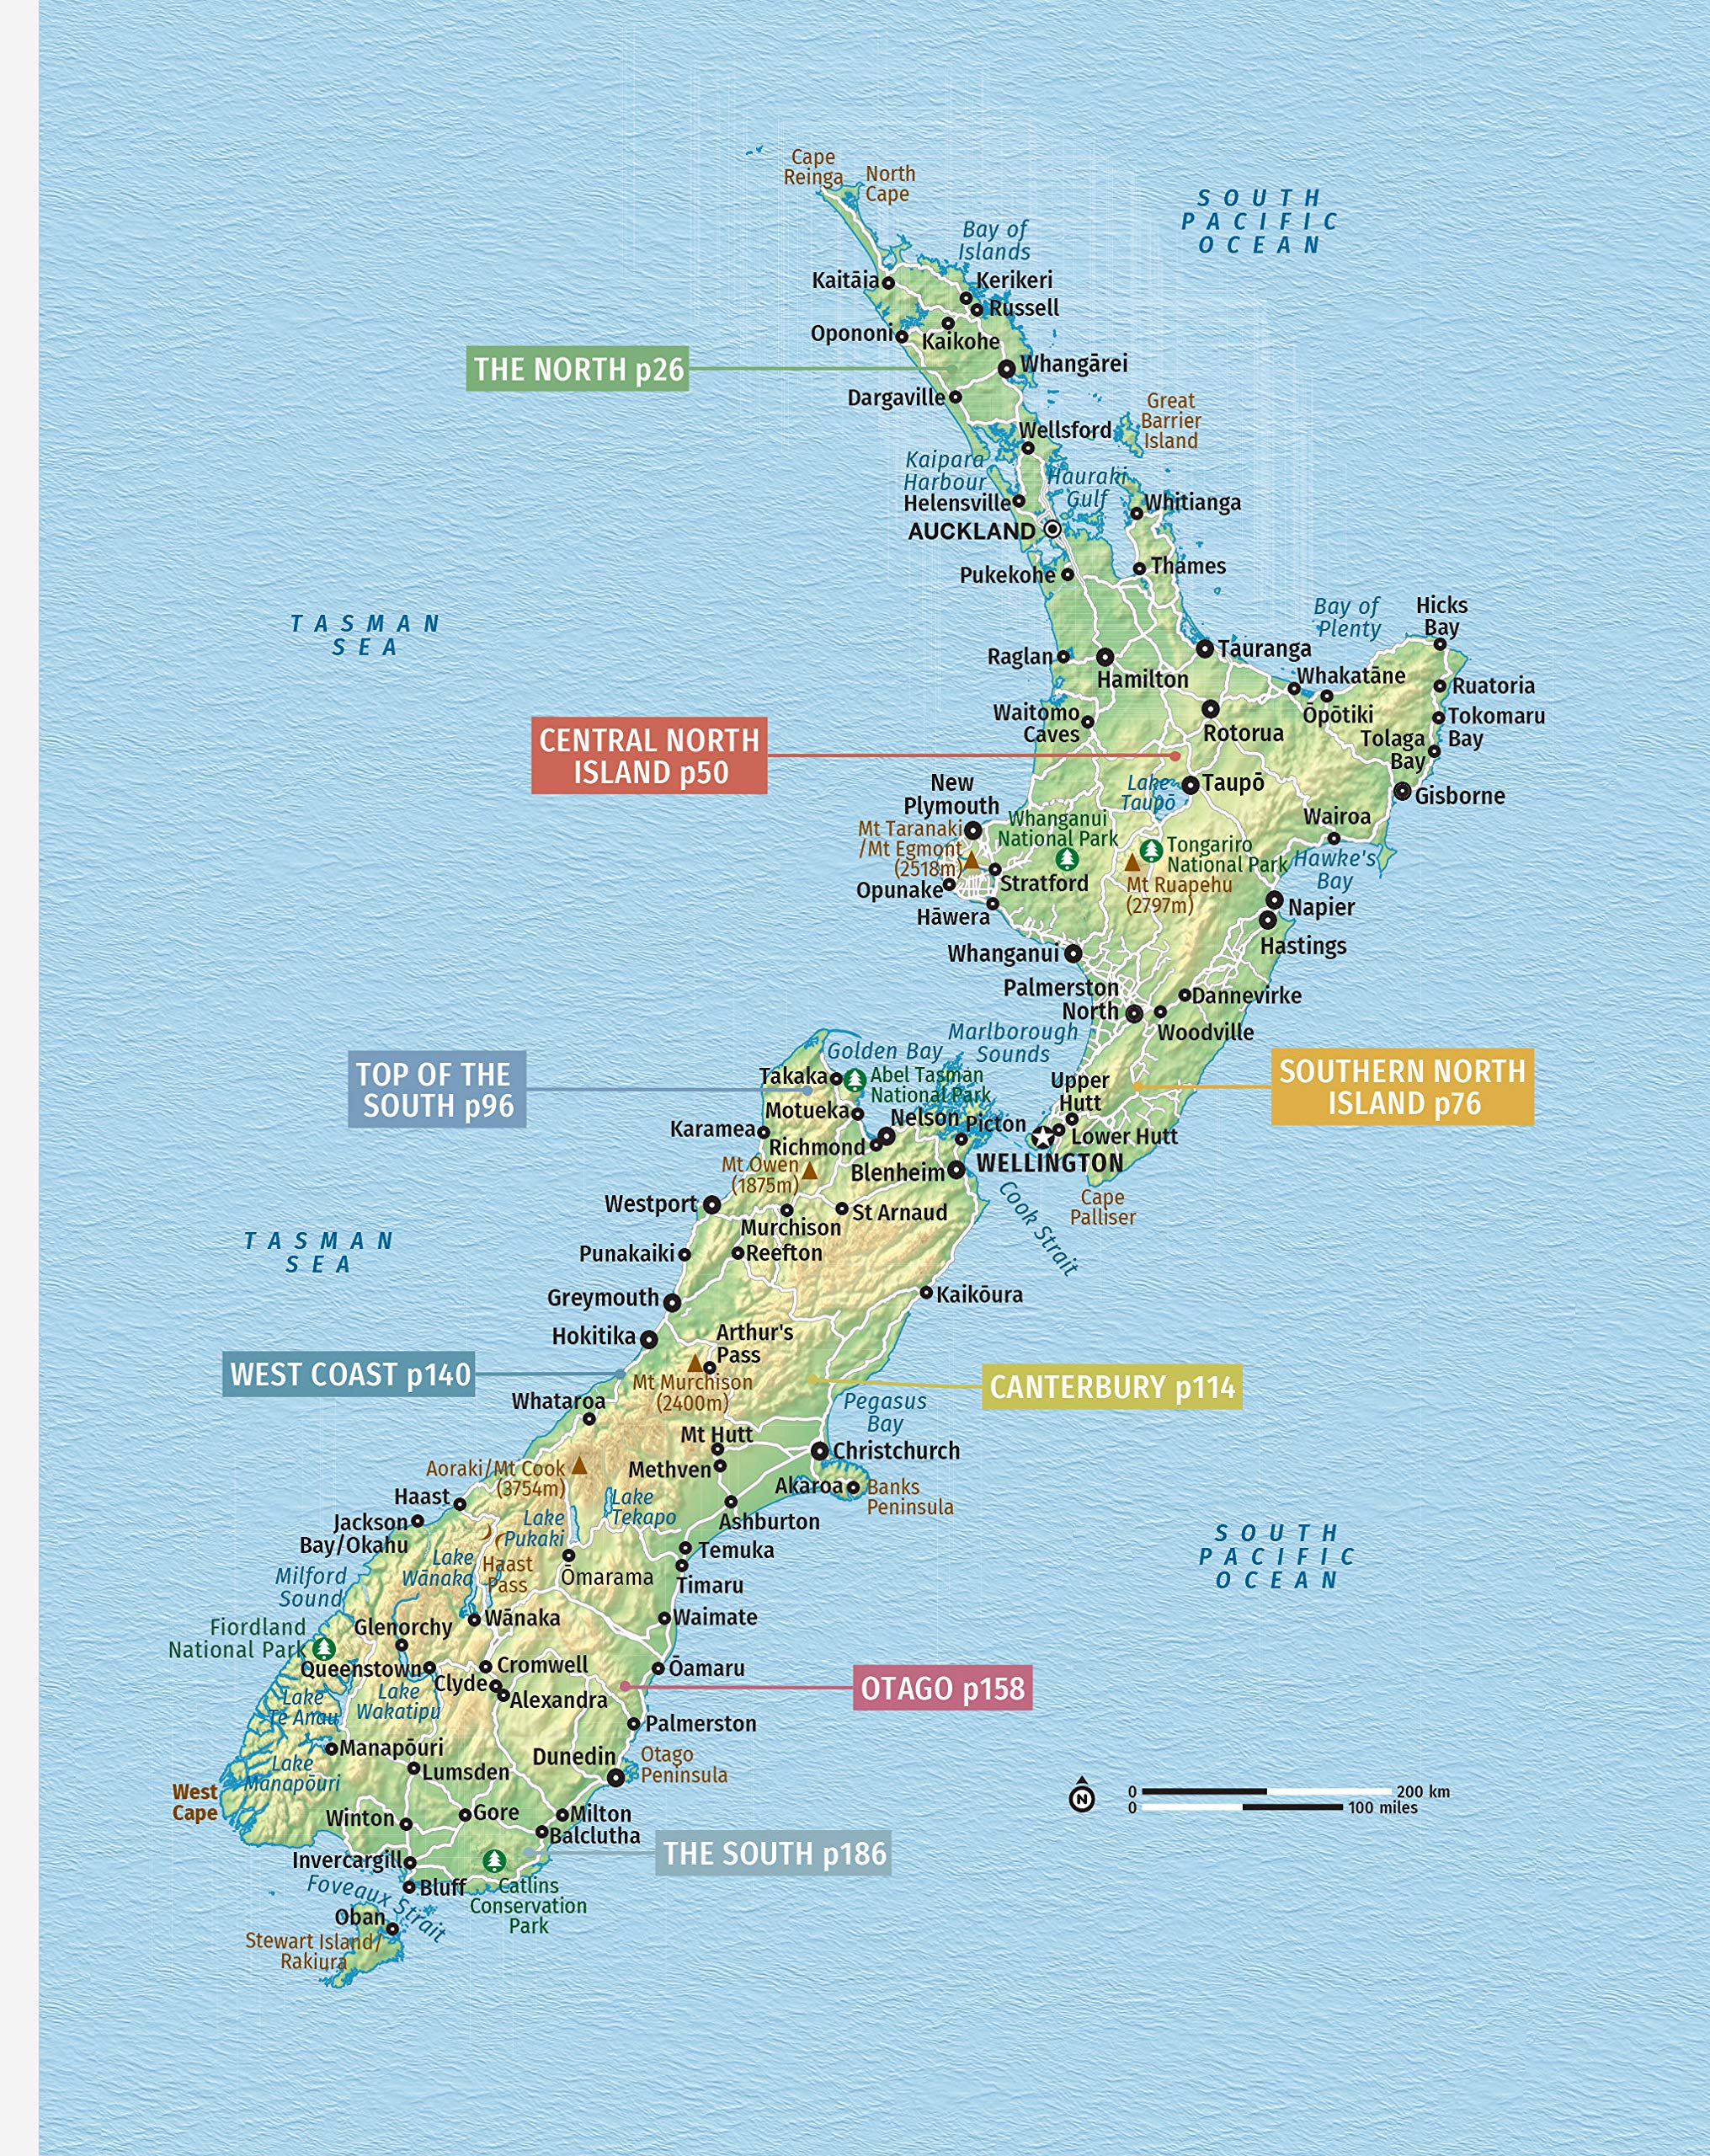 Guide　Travel　Travel　Zealand　Lonely　MapsCompany　hiking　Best　Planet　and　walks　day　–　New　maps